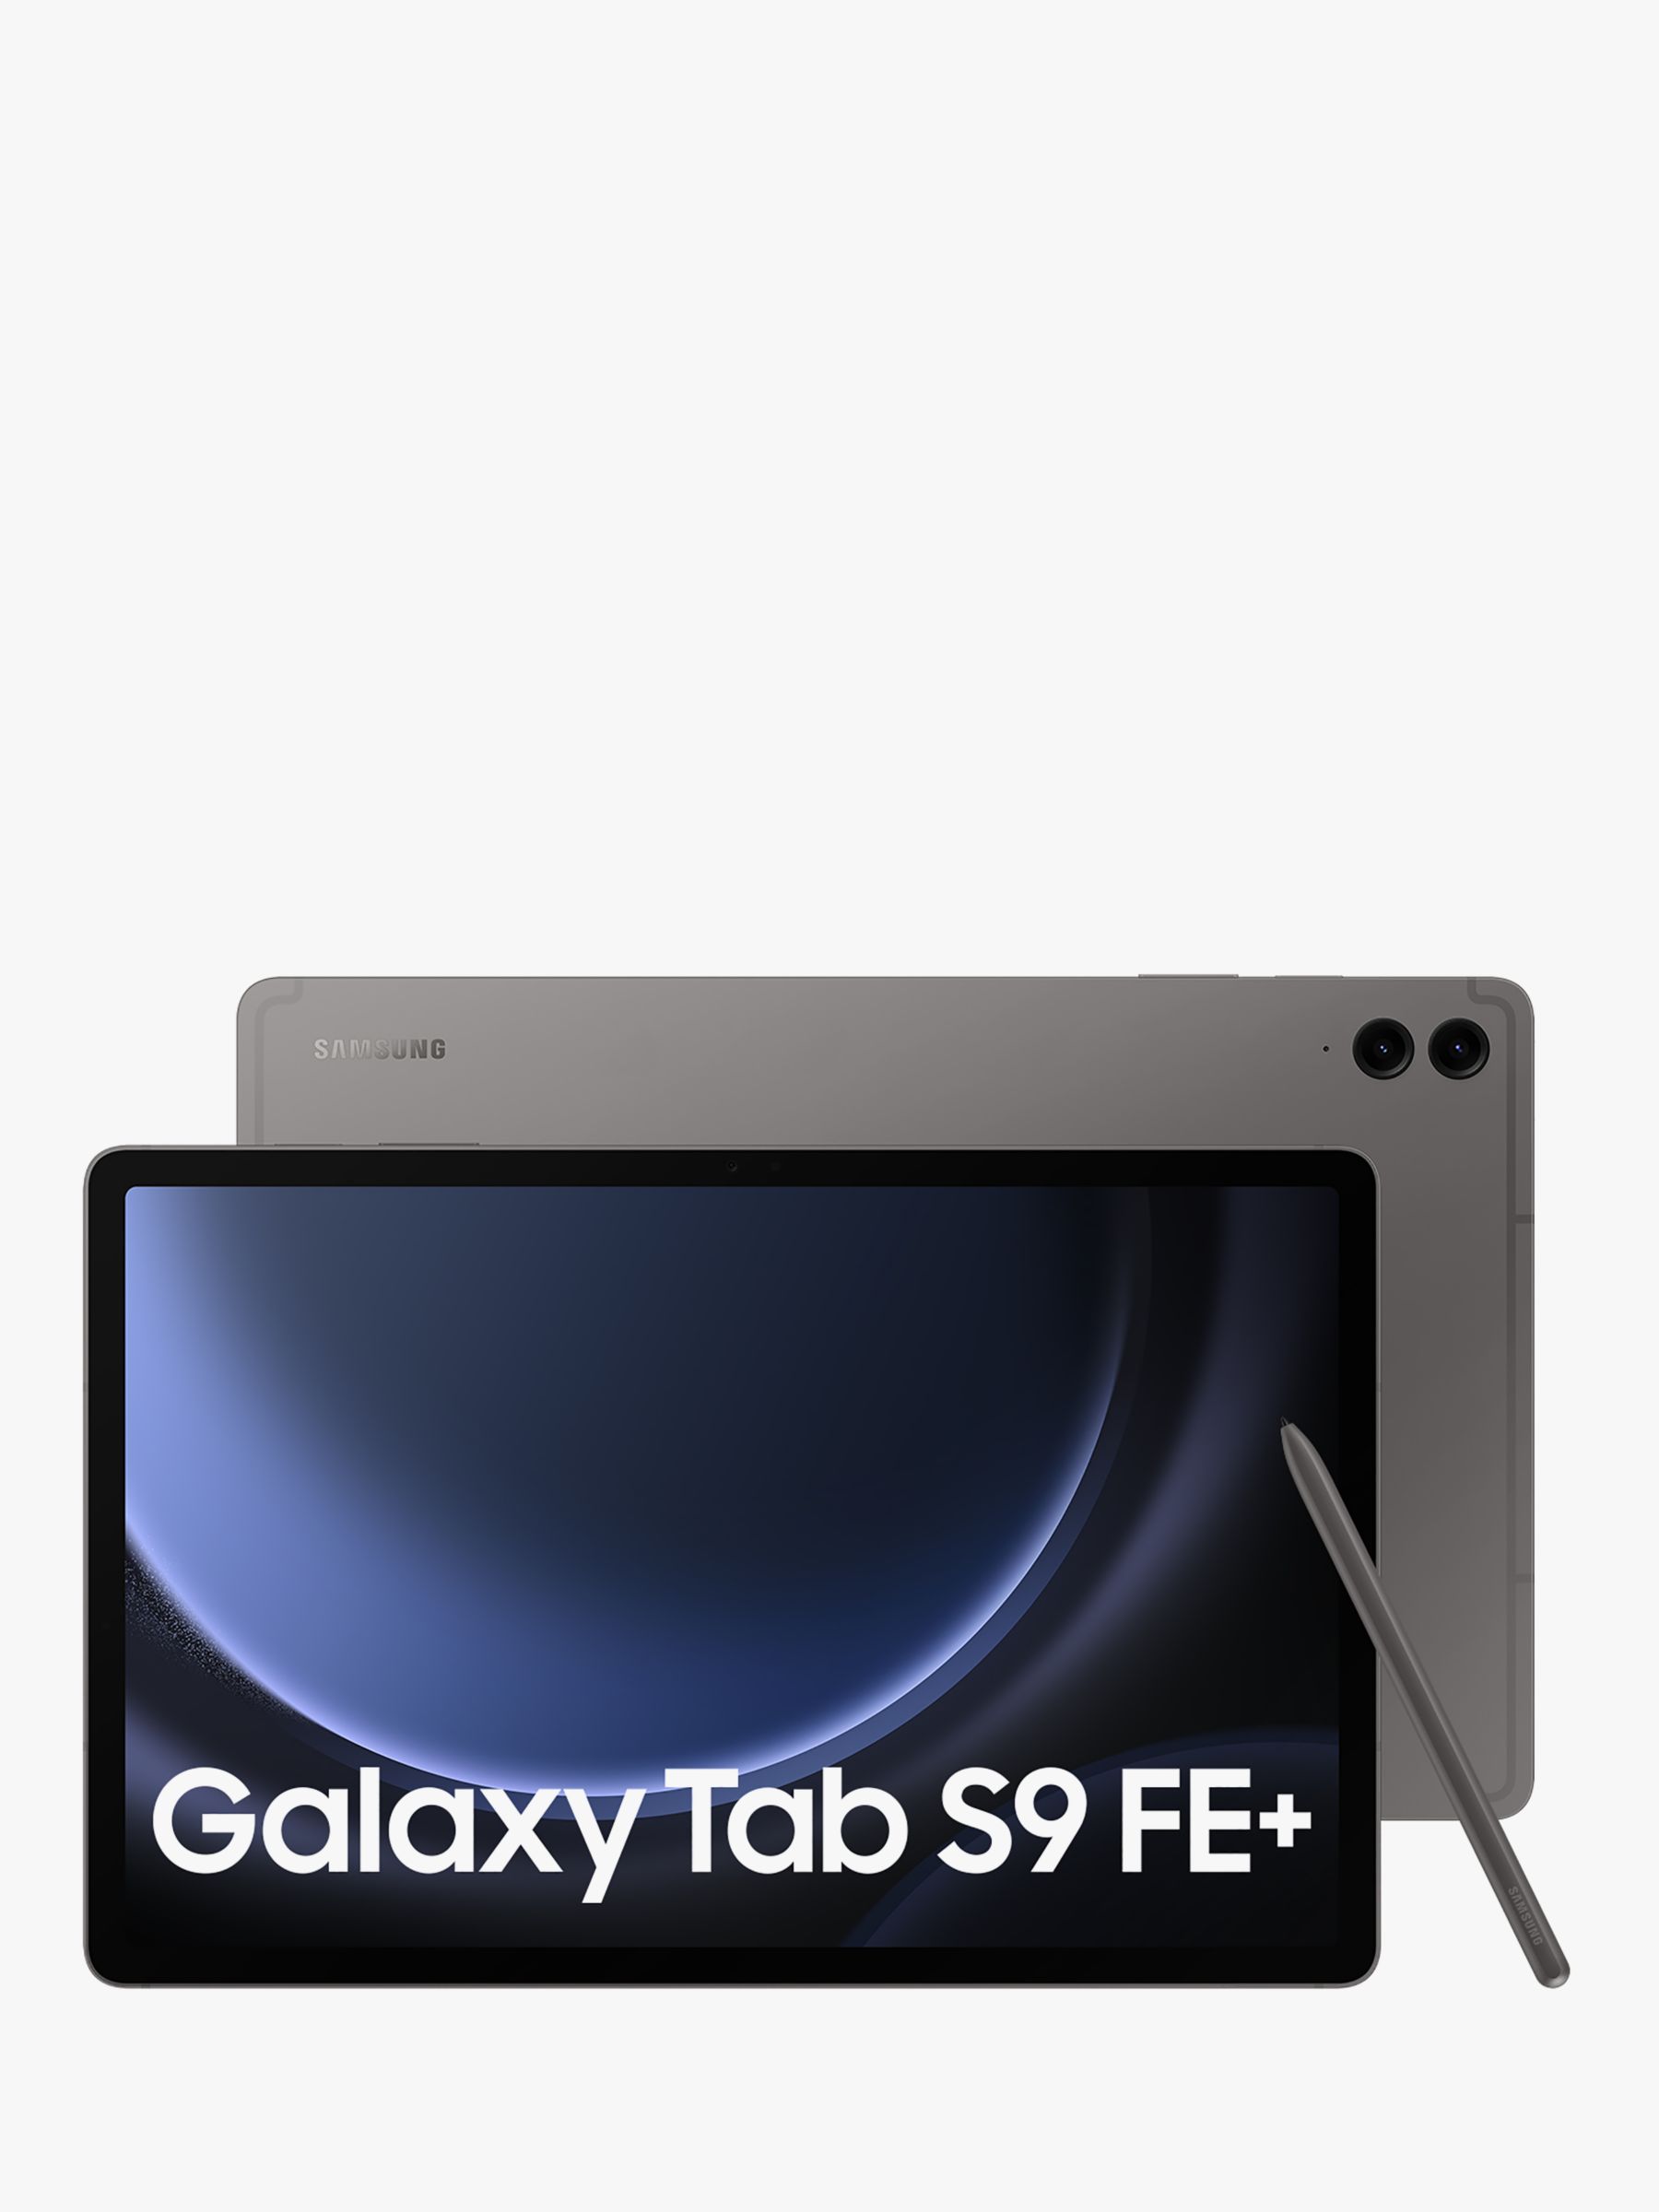 Samsung Galaxy Tab S9 FE+ Tablet with Bluetooth S Pen, Android